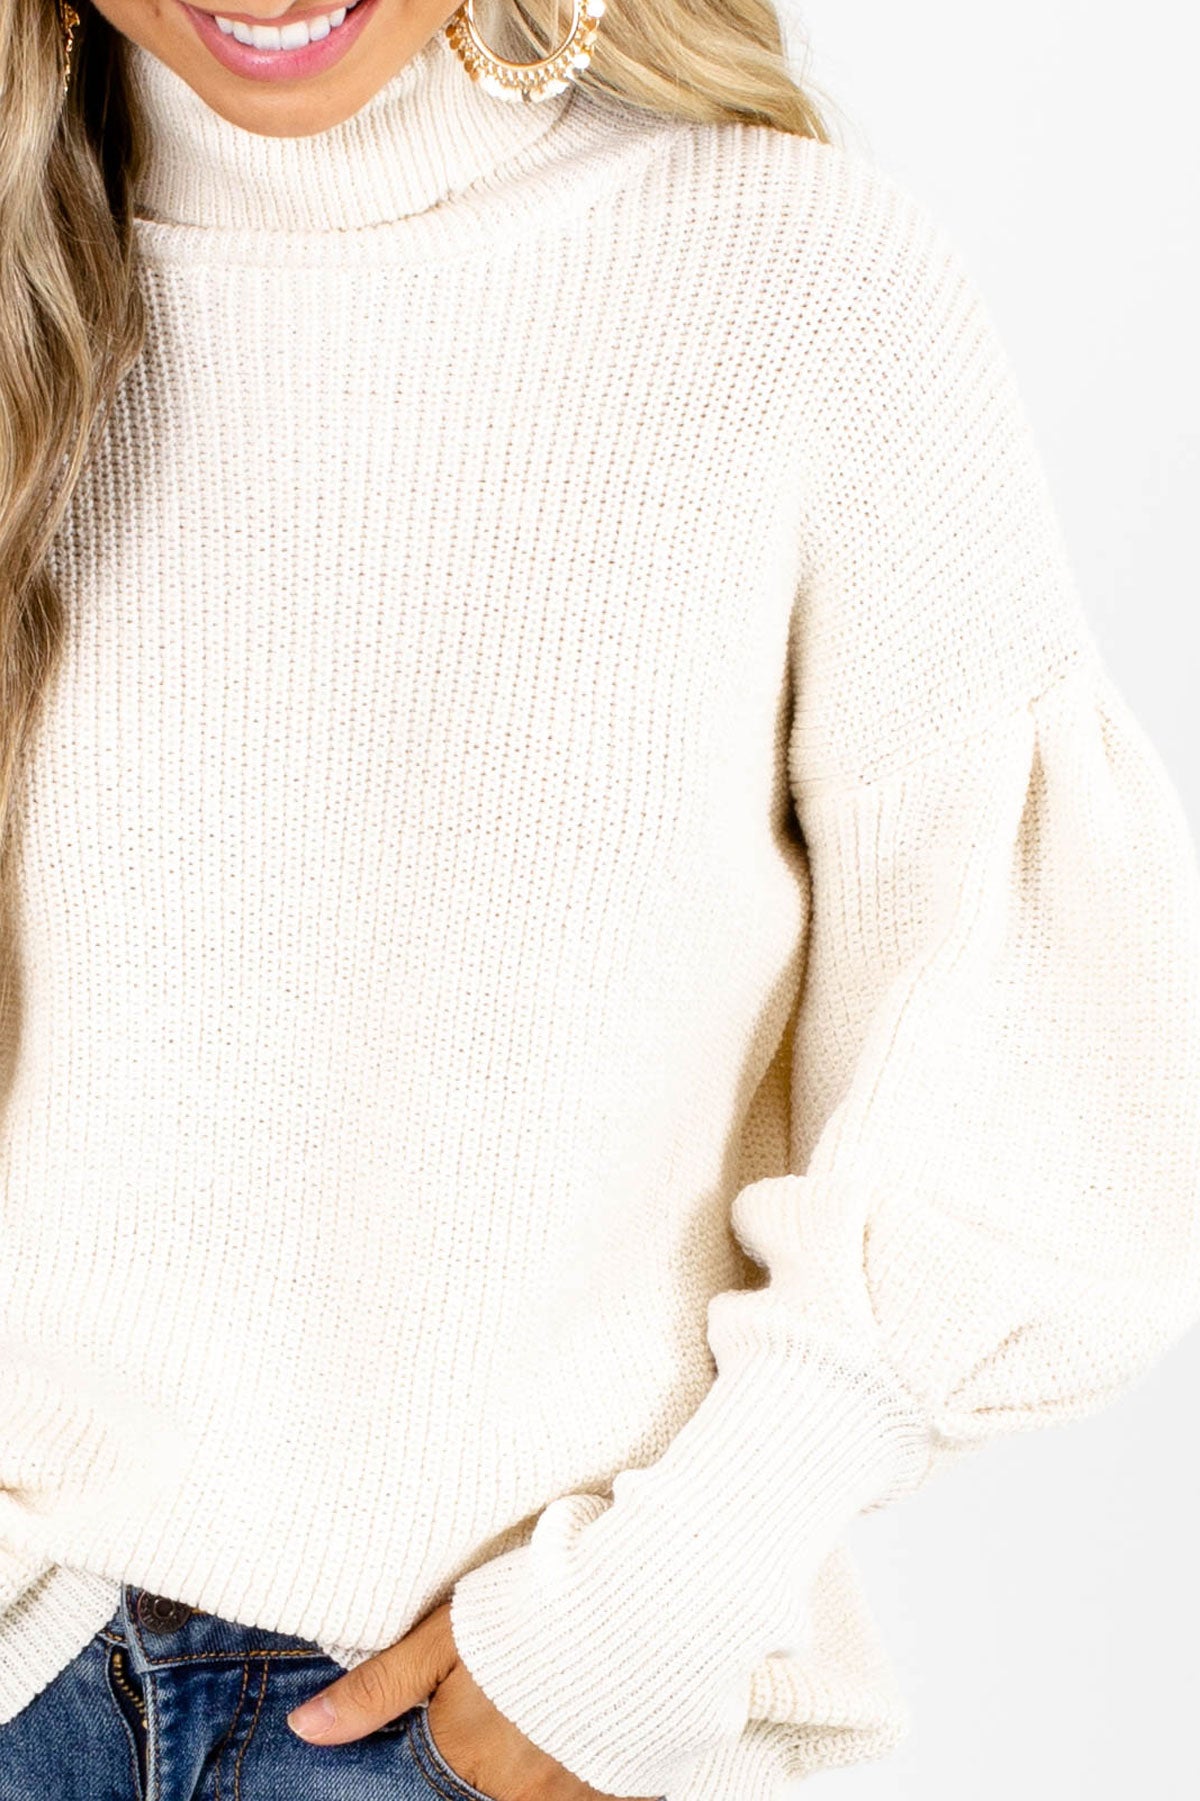 Women's Cream Knit Material Boutique Sweater